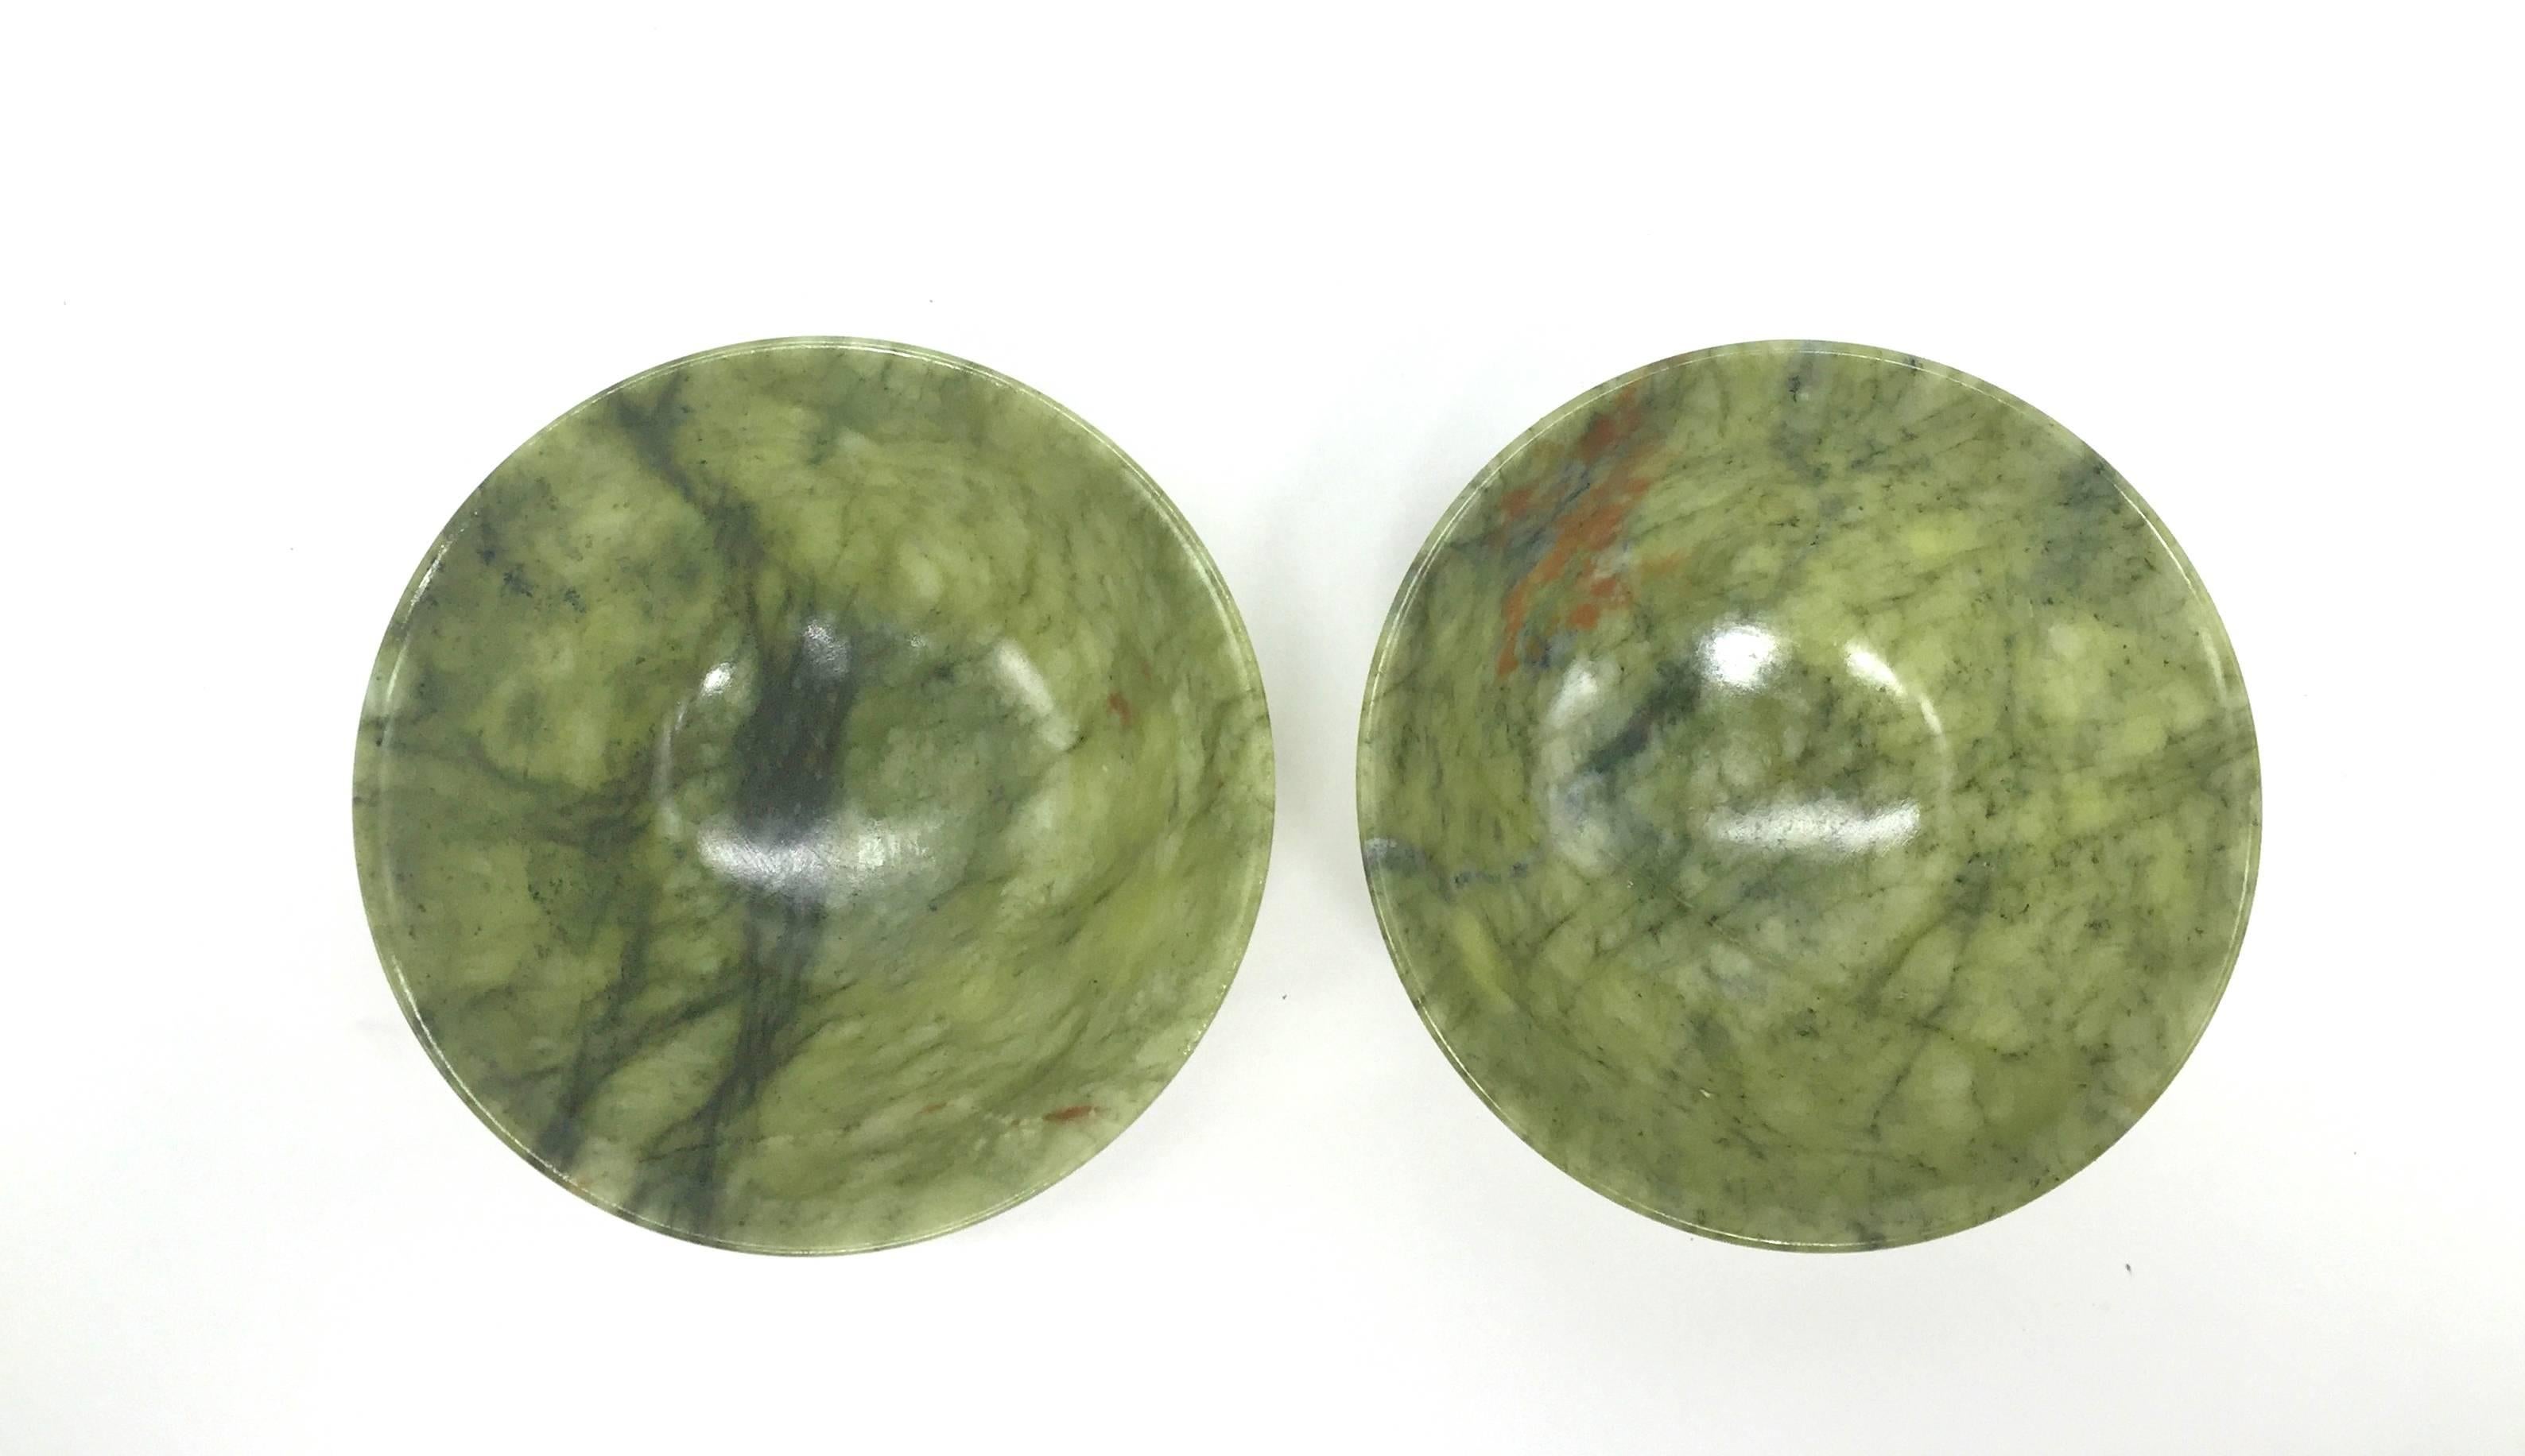 A pair of large serpentine bowls/cups. 

These beautiful bowls/cups have graceful lines. The natural inclusions are intriguing and unique. Under the light, the cups turn translucent, demonstrating the mesmerizing nature of the stone.

They are the